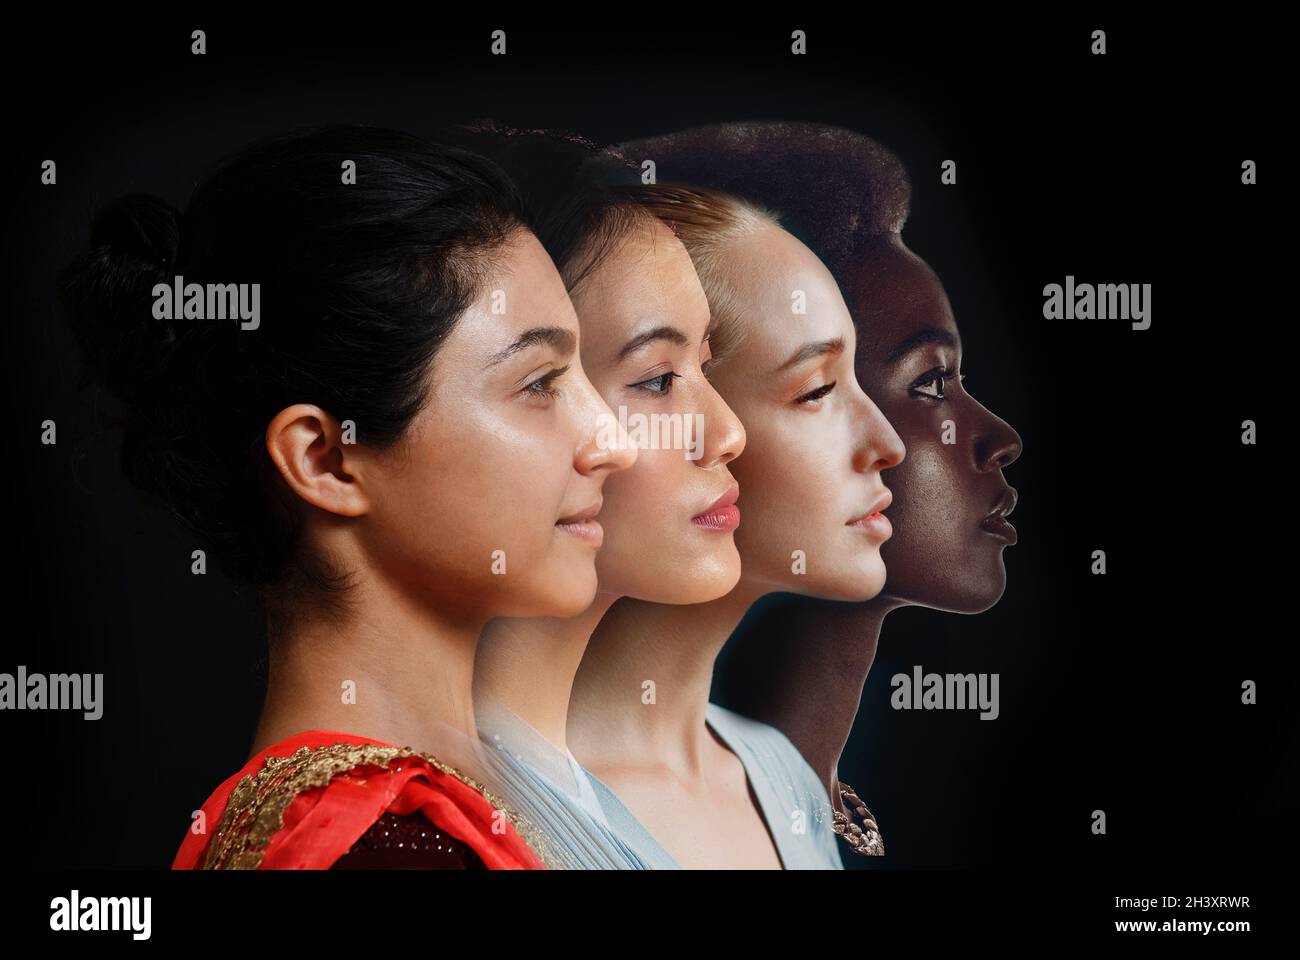 Caucasian and african american young woman isolated on black background. Stock Photo